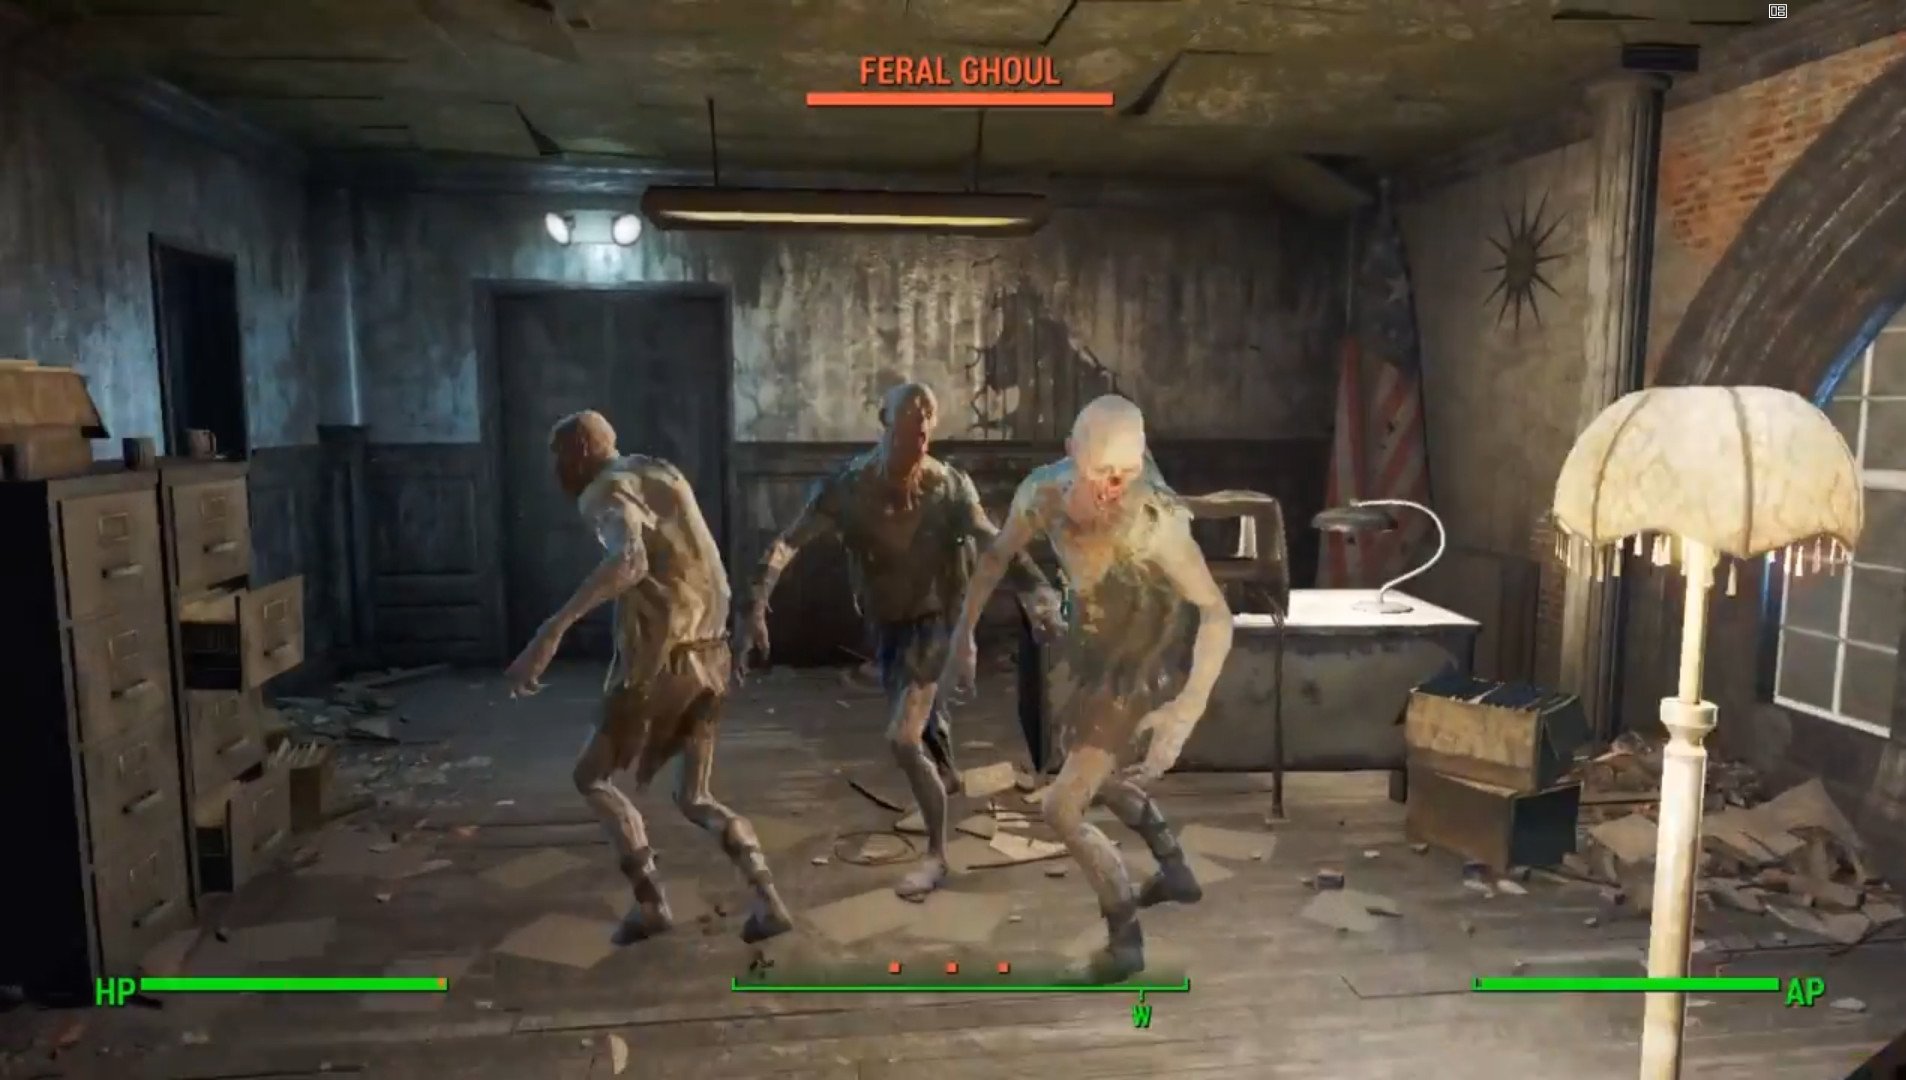 Feral Ghouls in Fallout 4